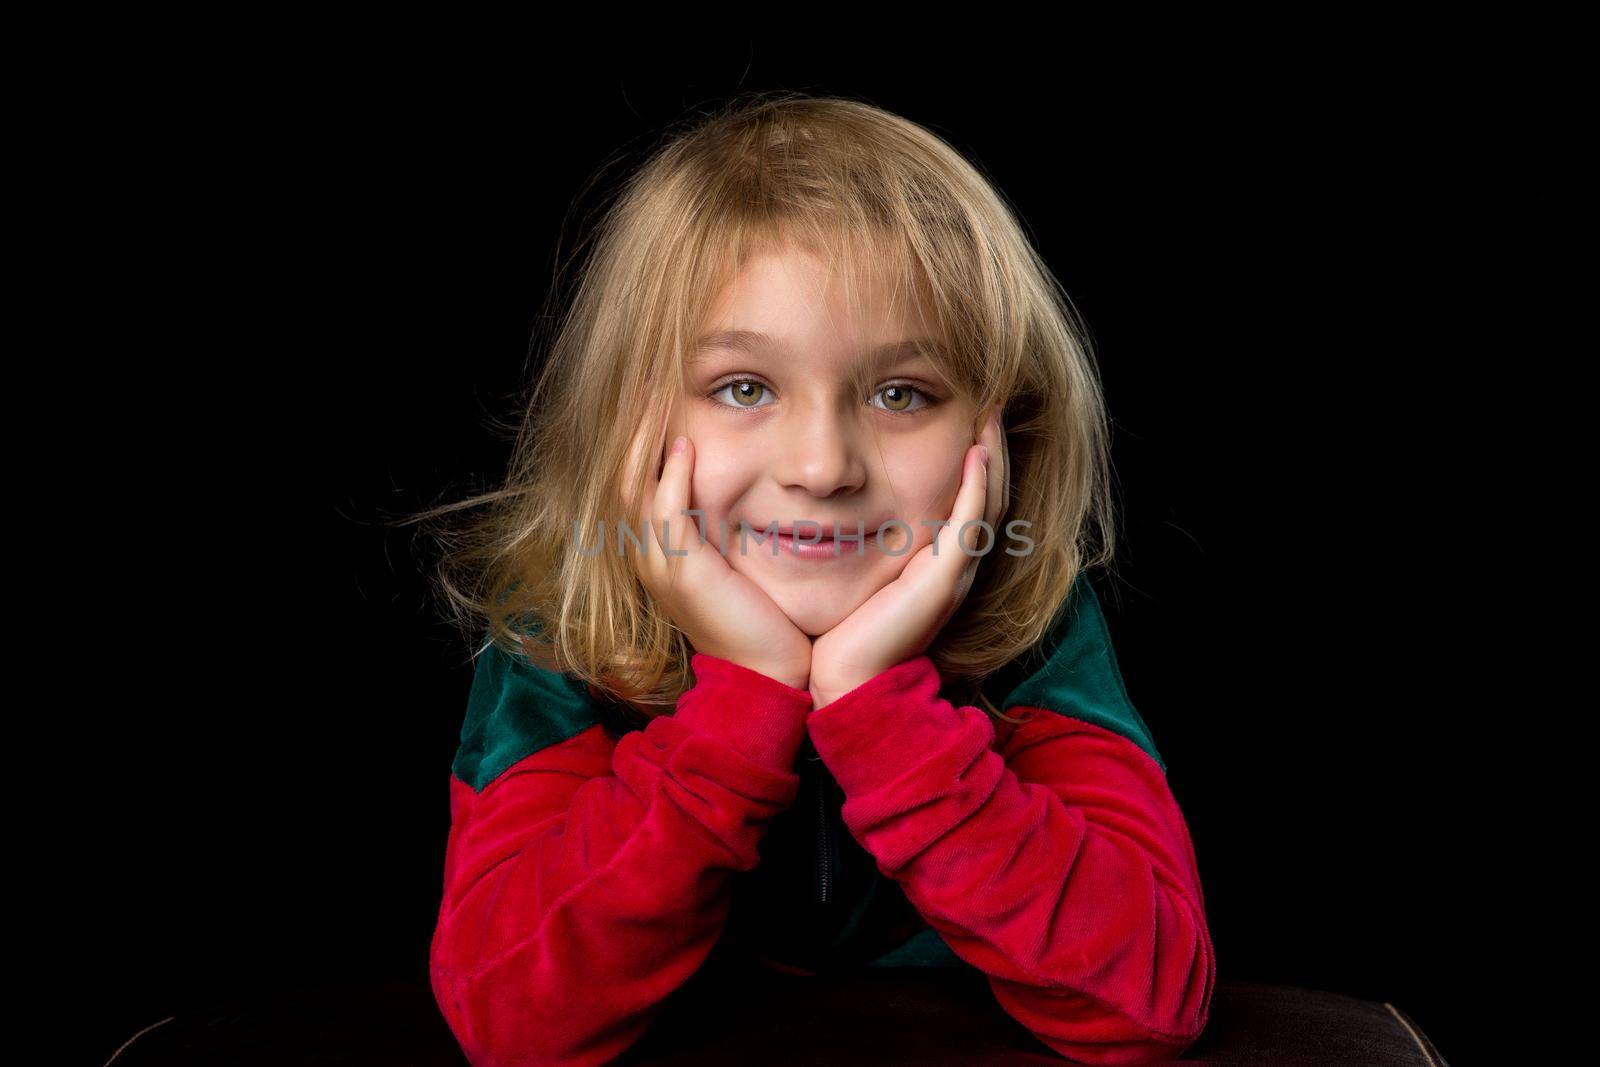 Close up view of a cute smiling little girl posing on black background. by kolesnikov_studio